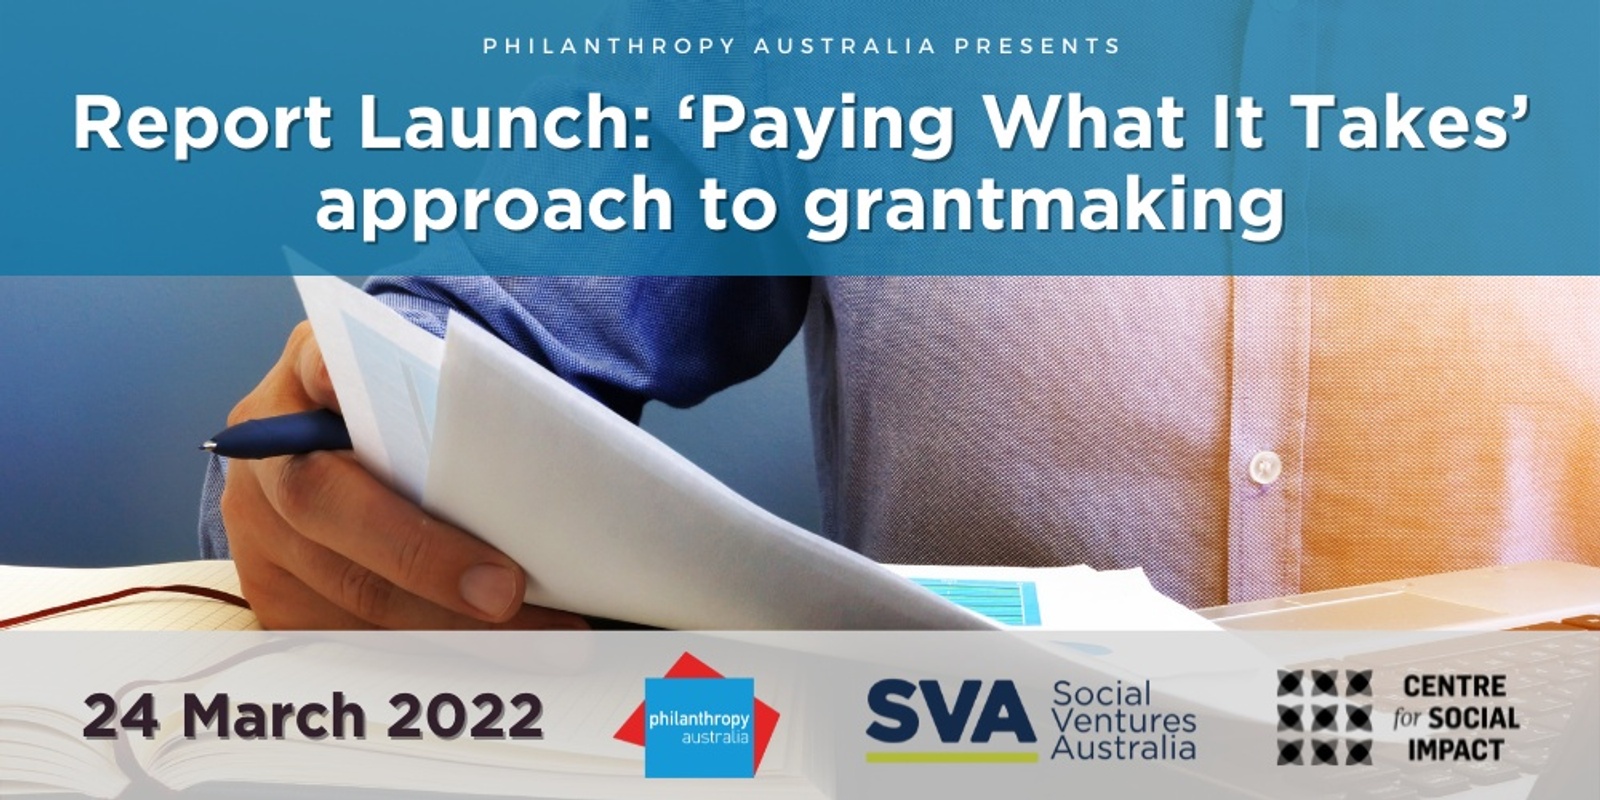 Banner image for Report Launch: ‘Paying What It Takes’ approach to grantmaking